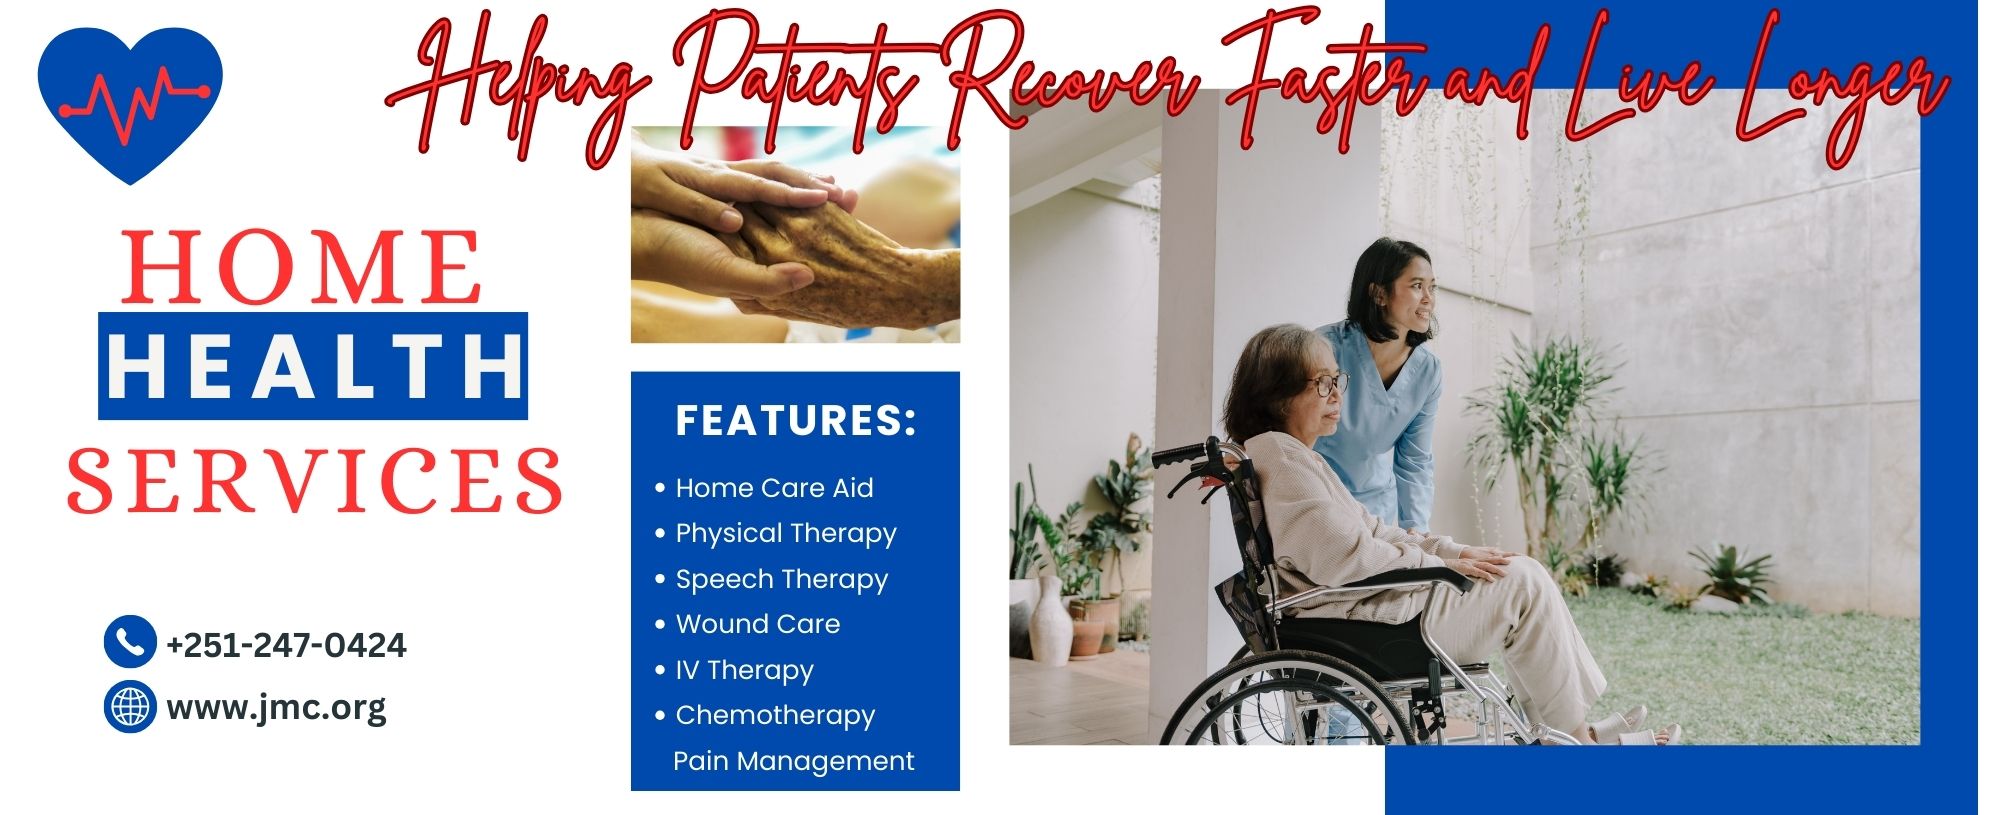 Home health services